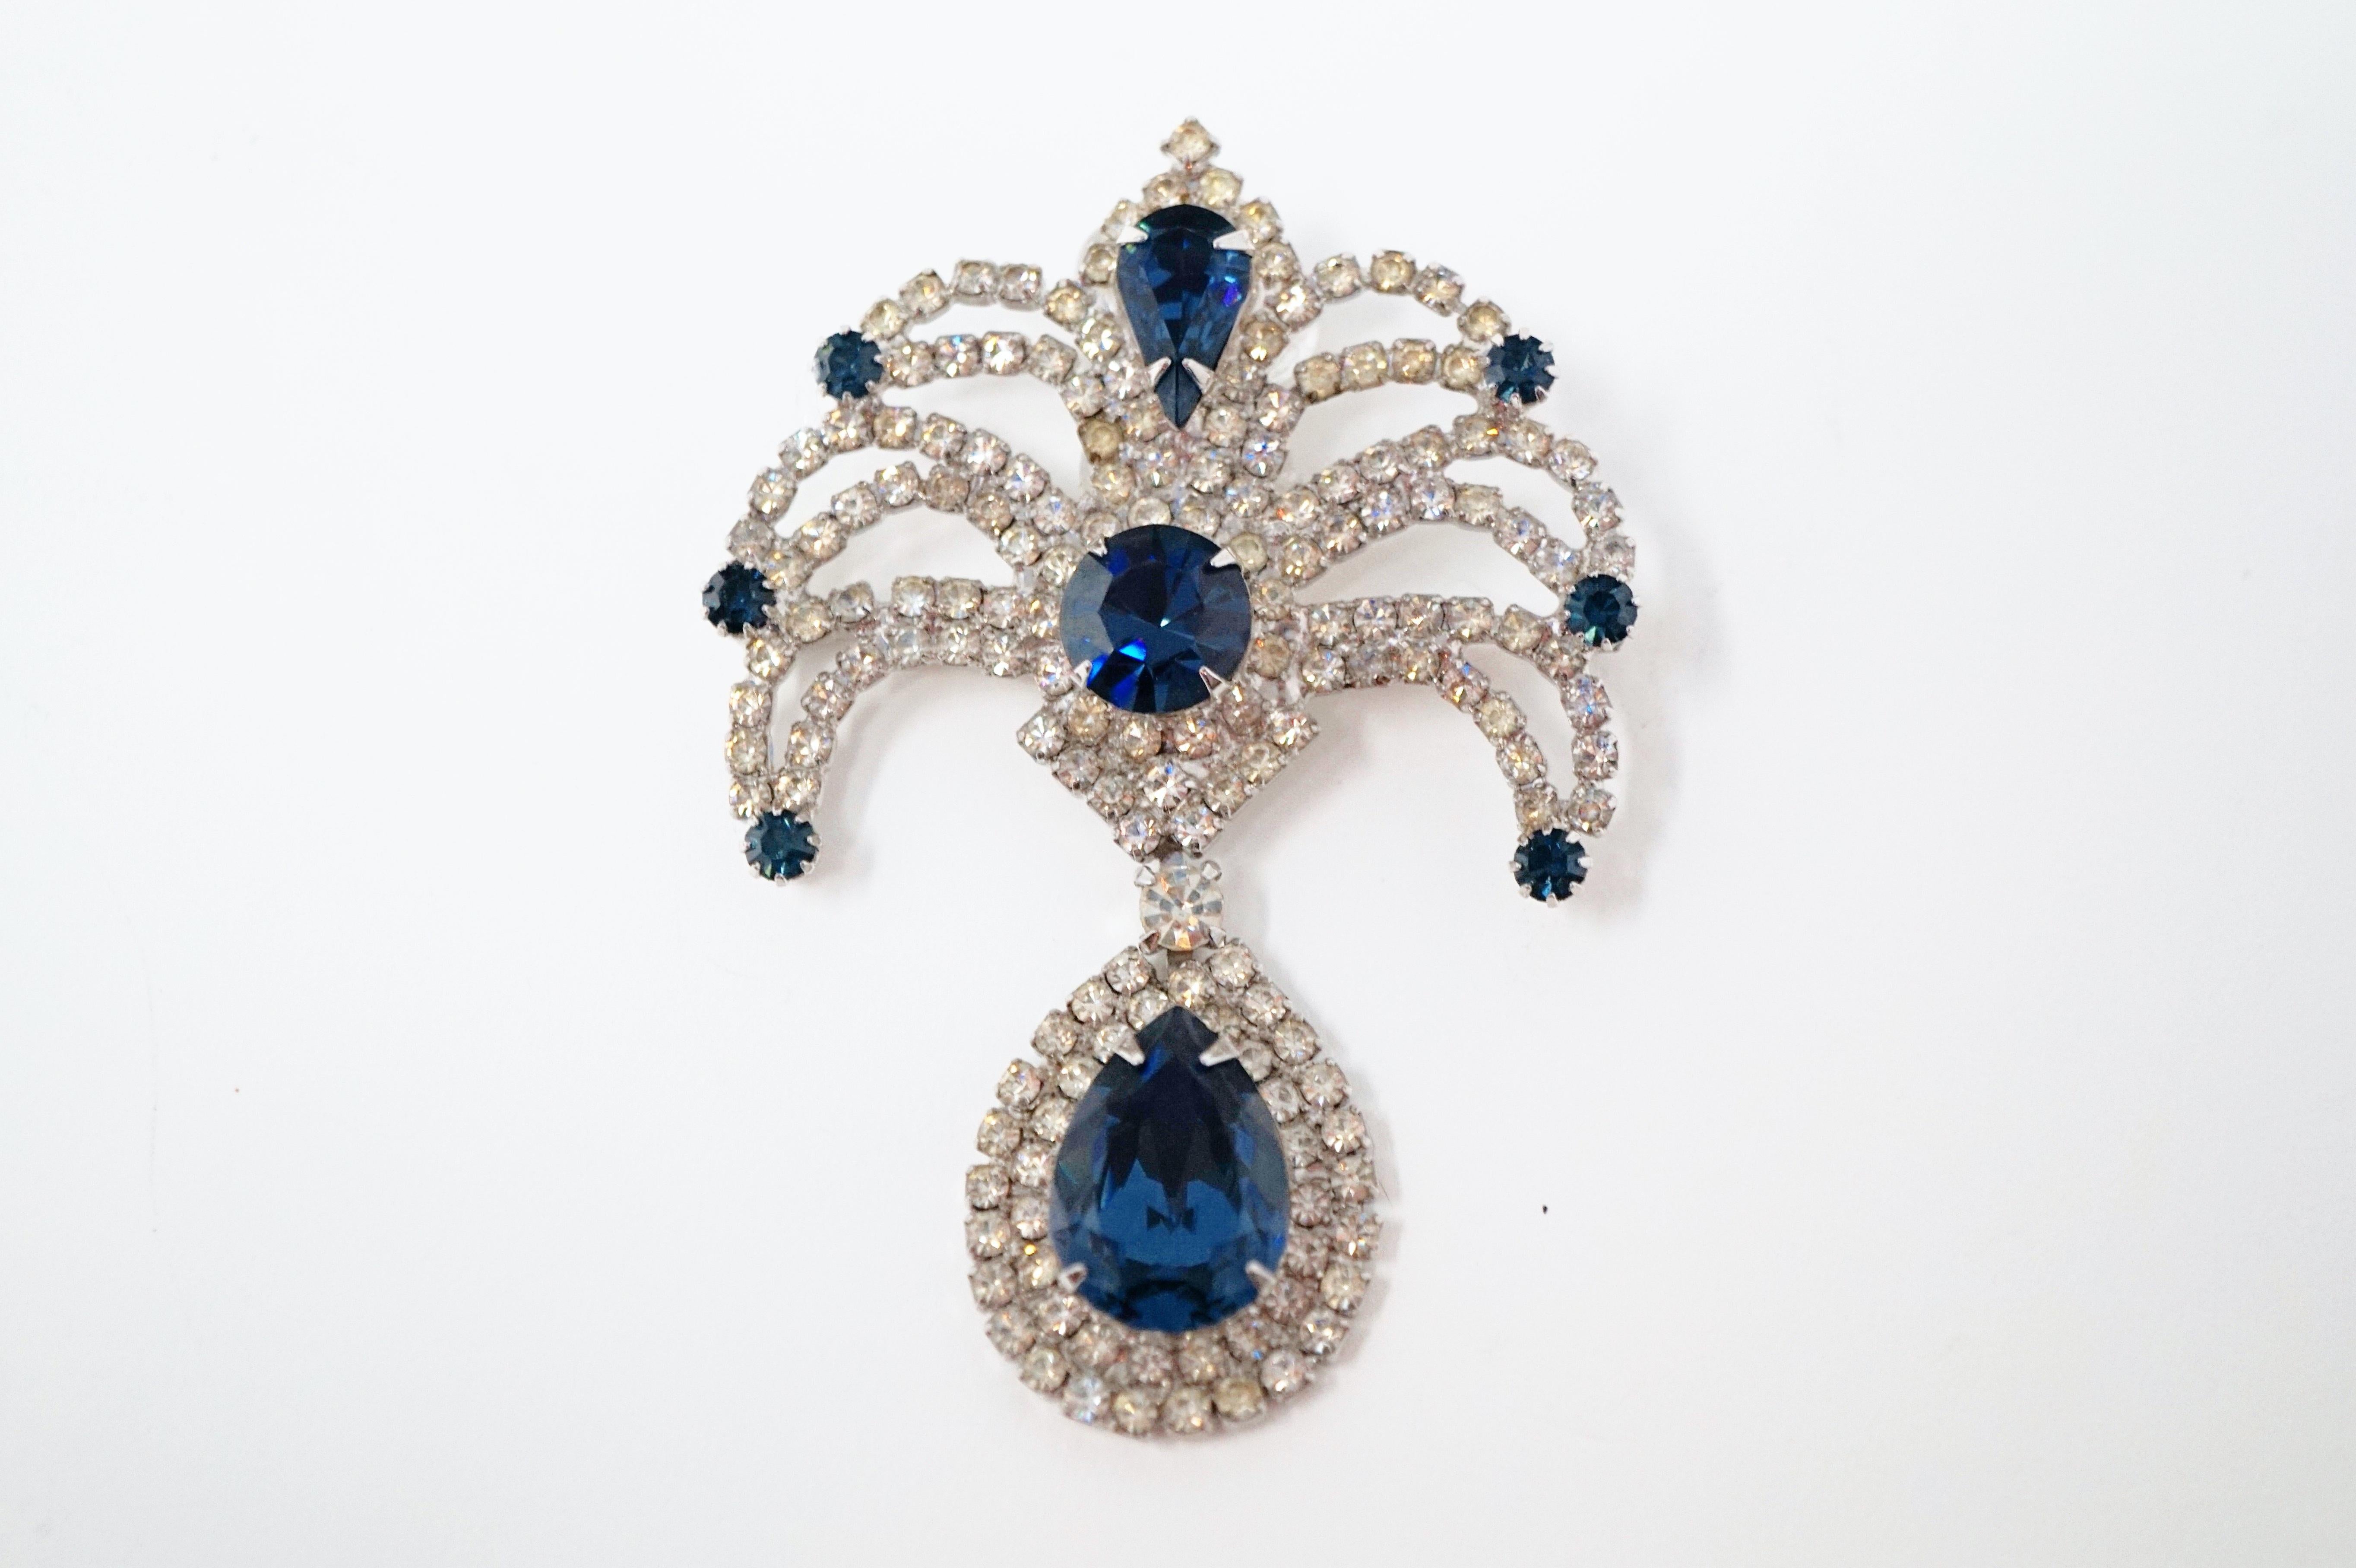 Absolutely gorgeous sparkling rhinestone brooch from the mid-century era, featuring prong set faceted Sapphire-colored crystal rhinestones surrounded by clear crystal rhinestone pavé with silver tone hardware.

DETAILS:
- Silver tone
- Approx 2